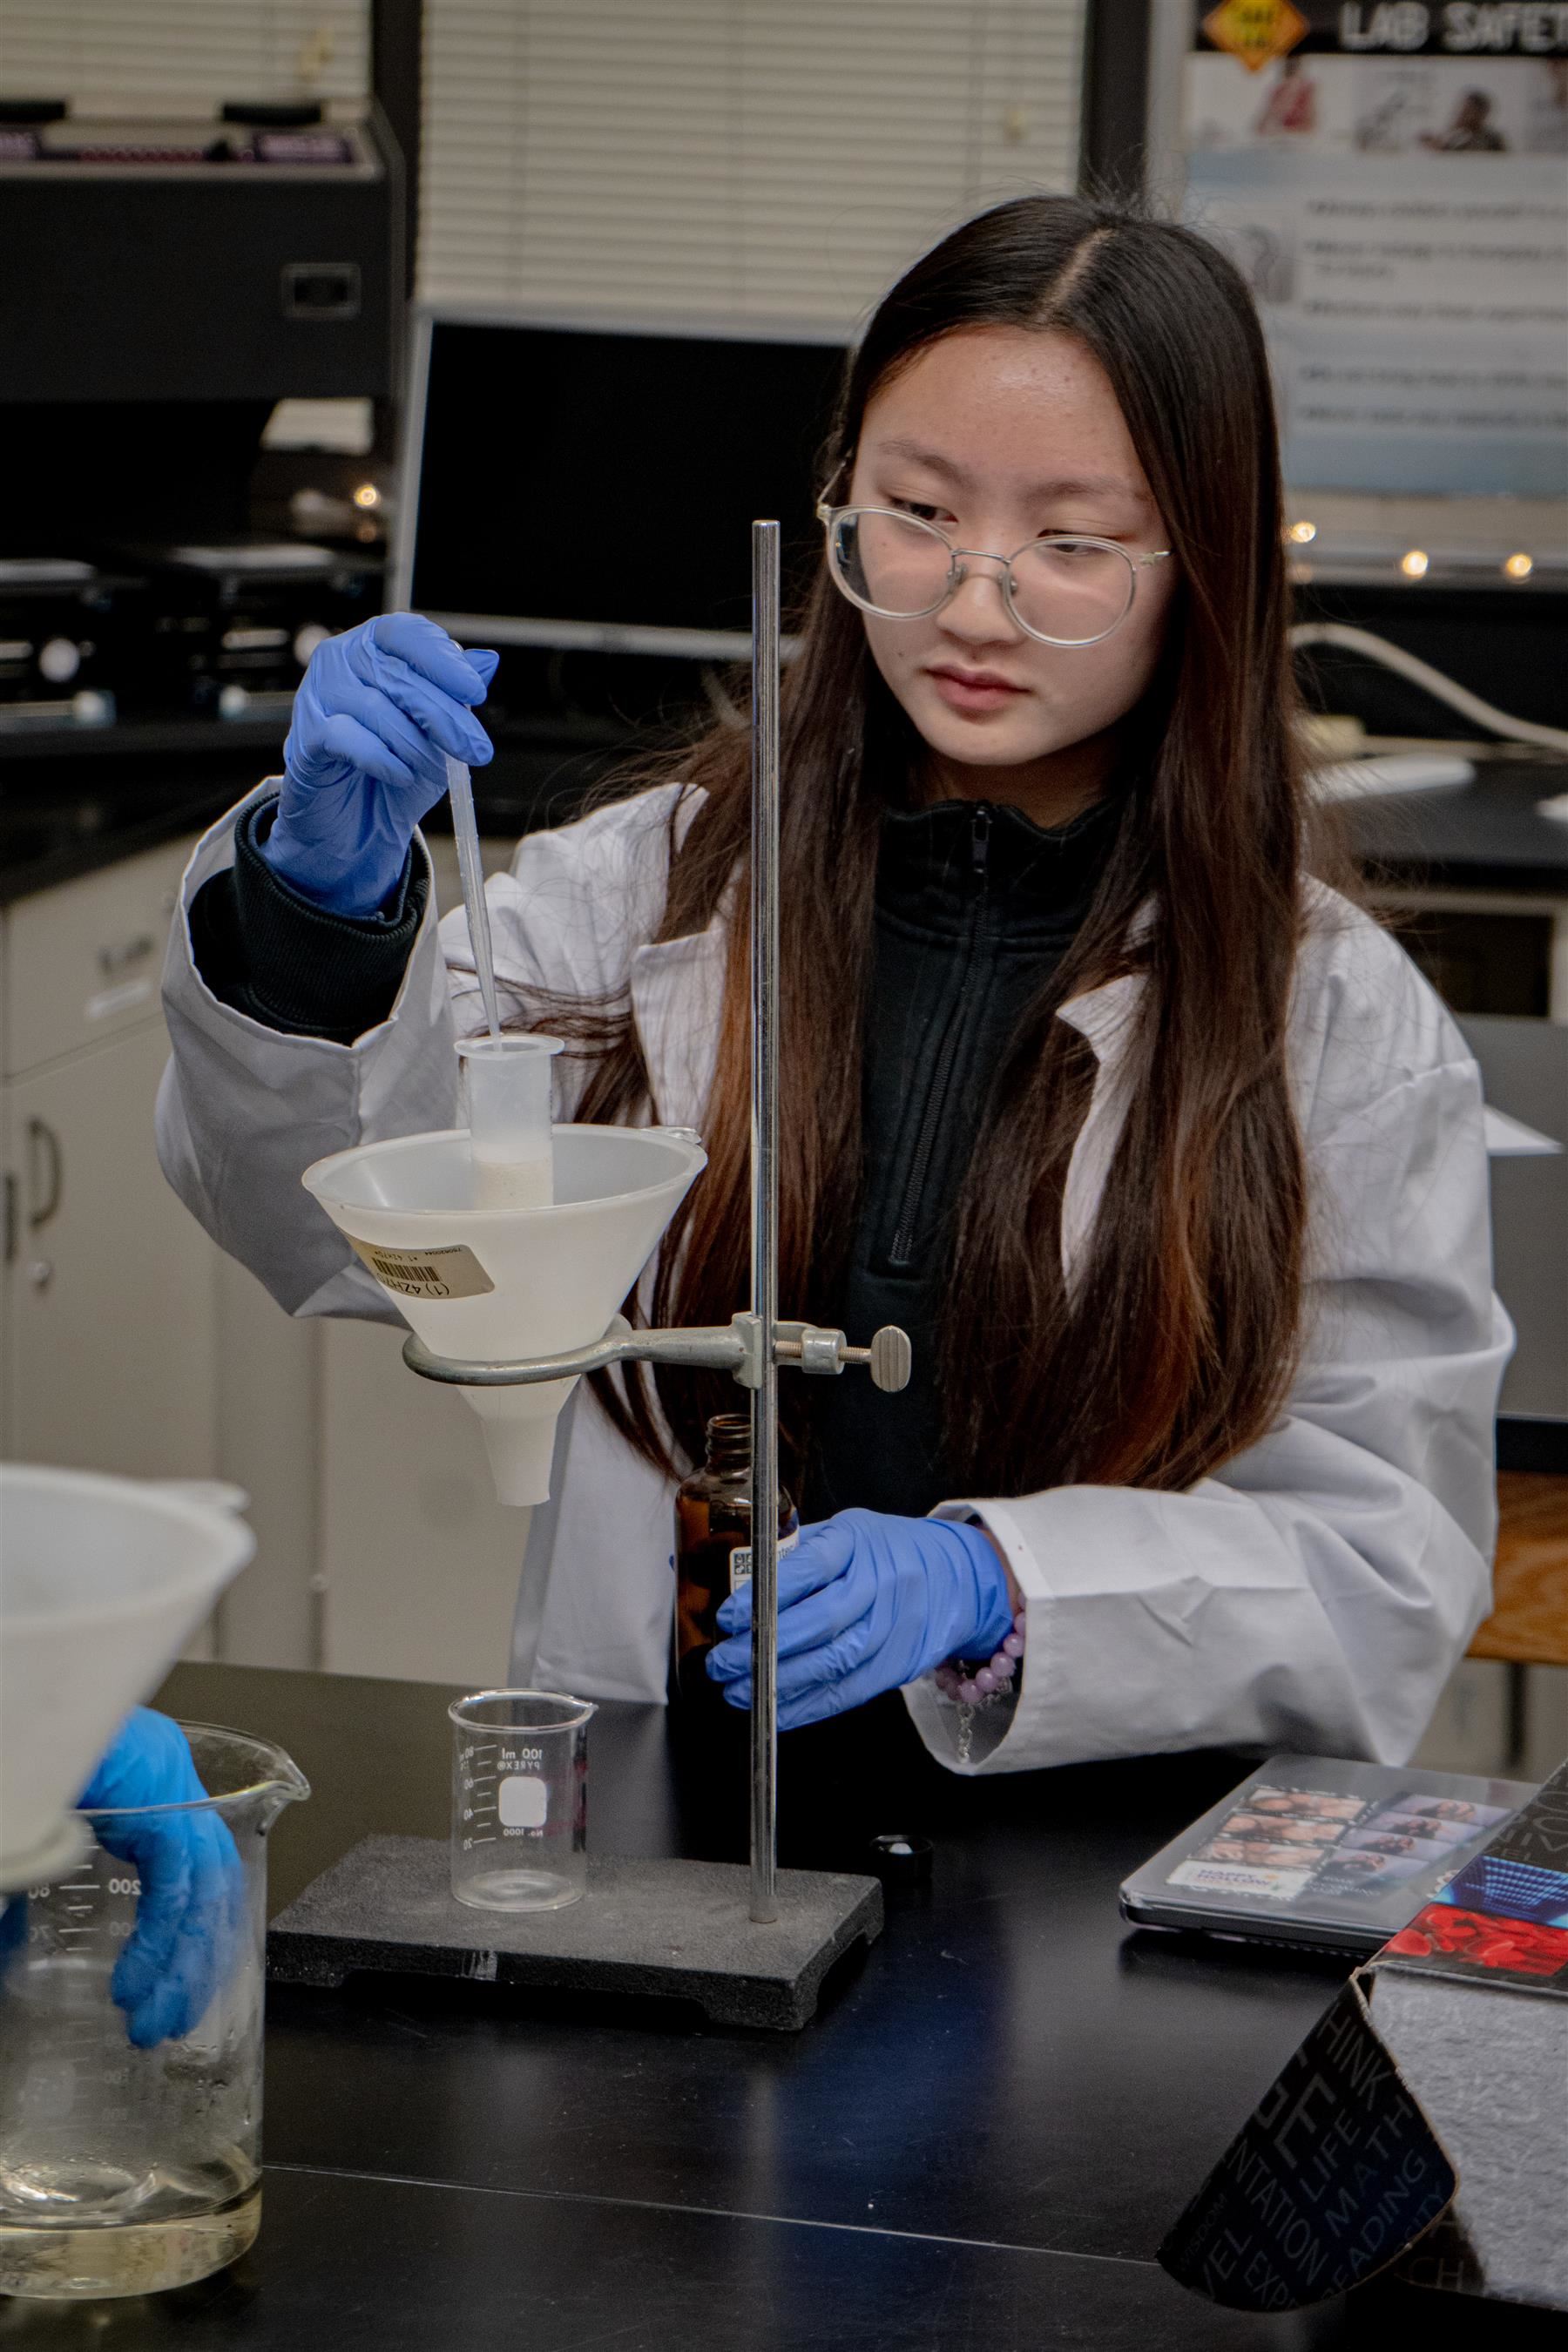 A young student wearing round glasses and blue protective gloves is focused intently on a chemistry experiment in a laborator